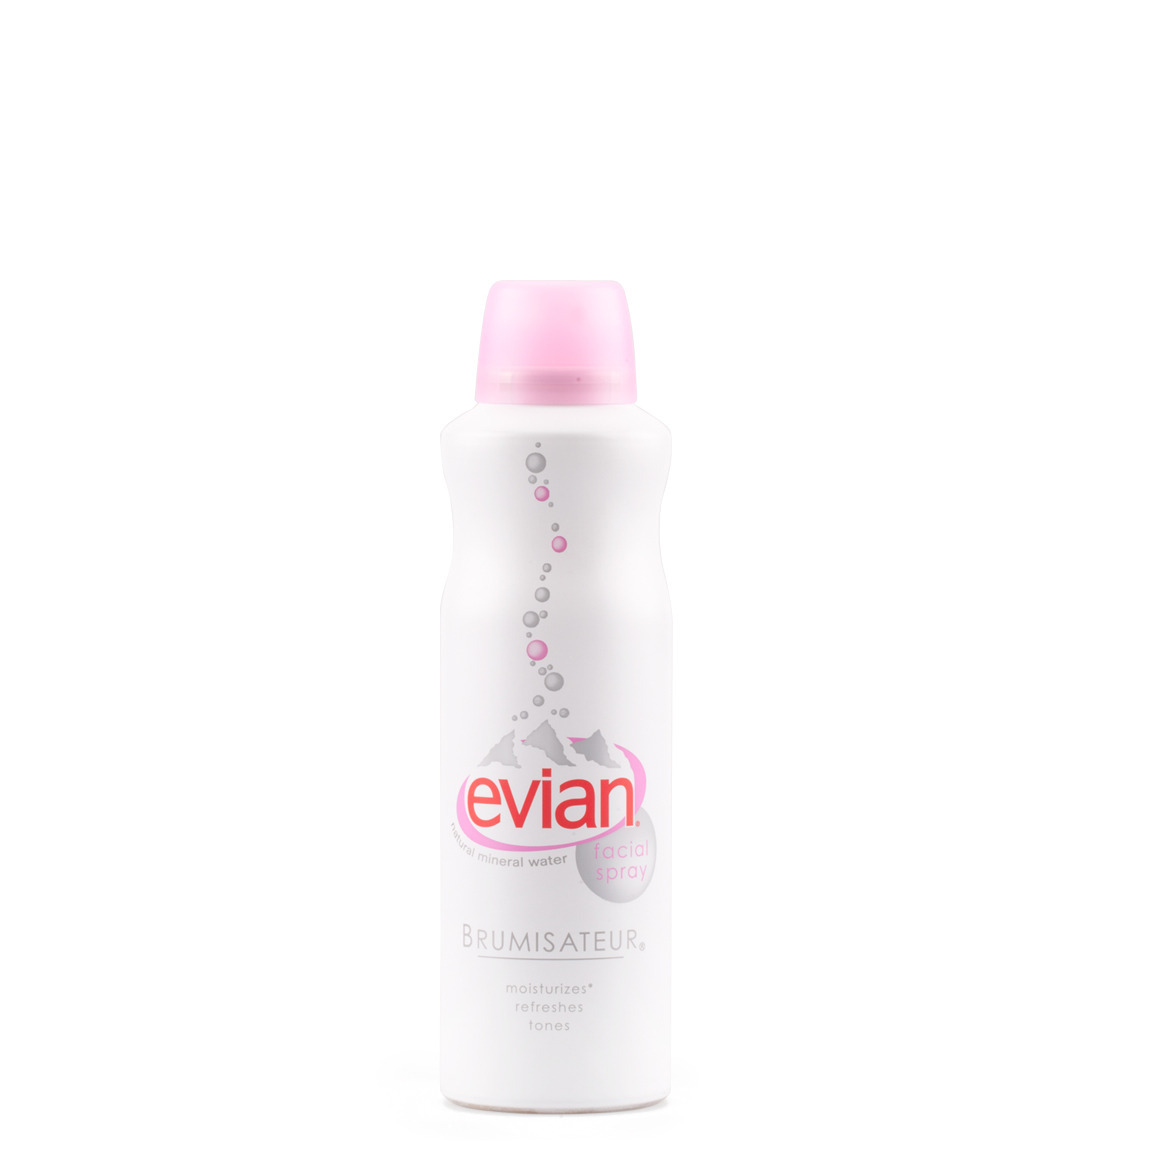 Evian Mineral Water Facial Spray 5 oz. alternative view 1 - product swatch.